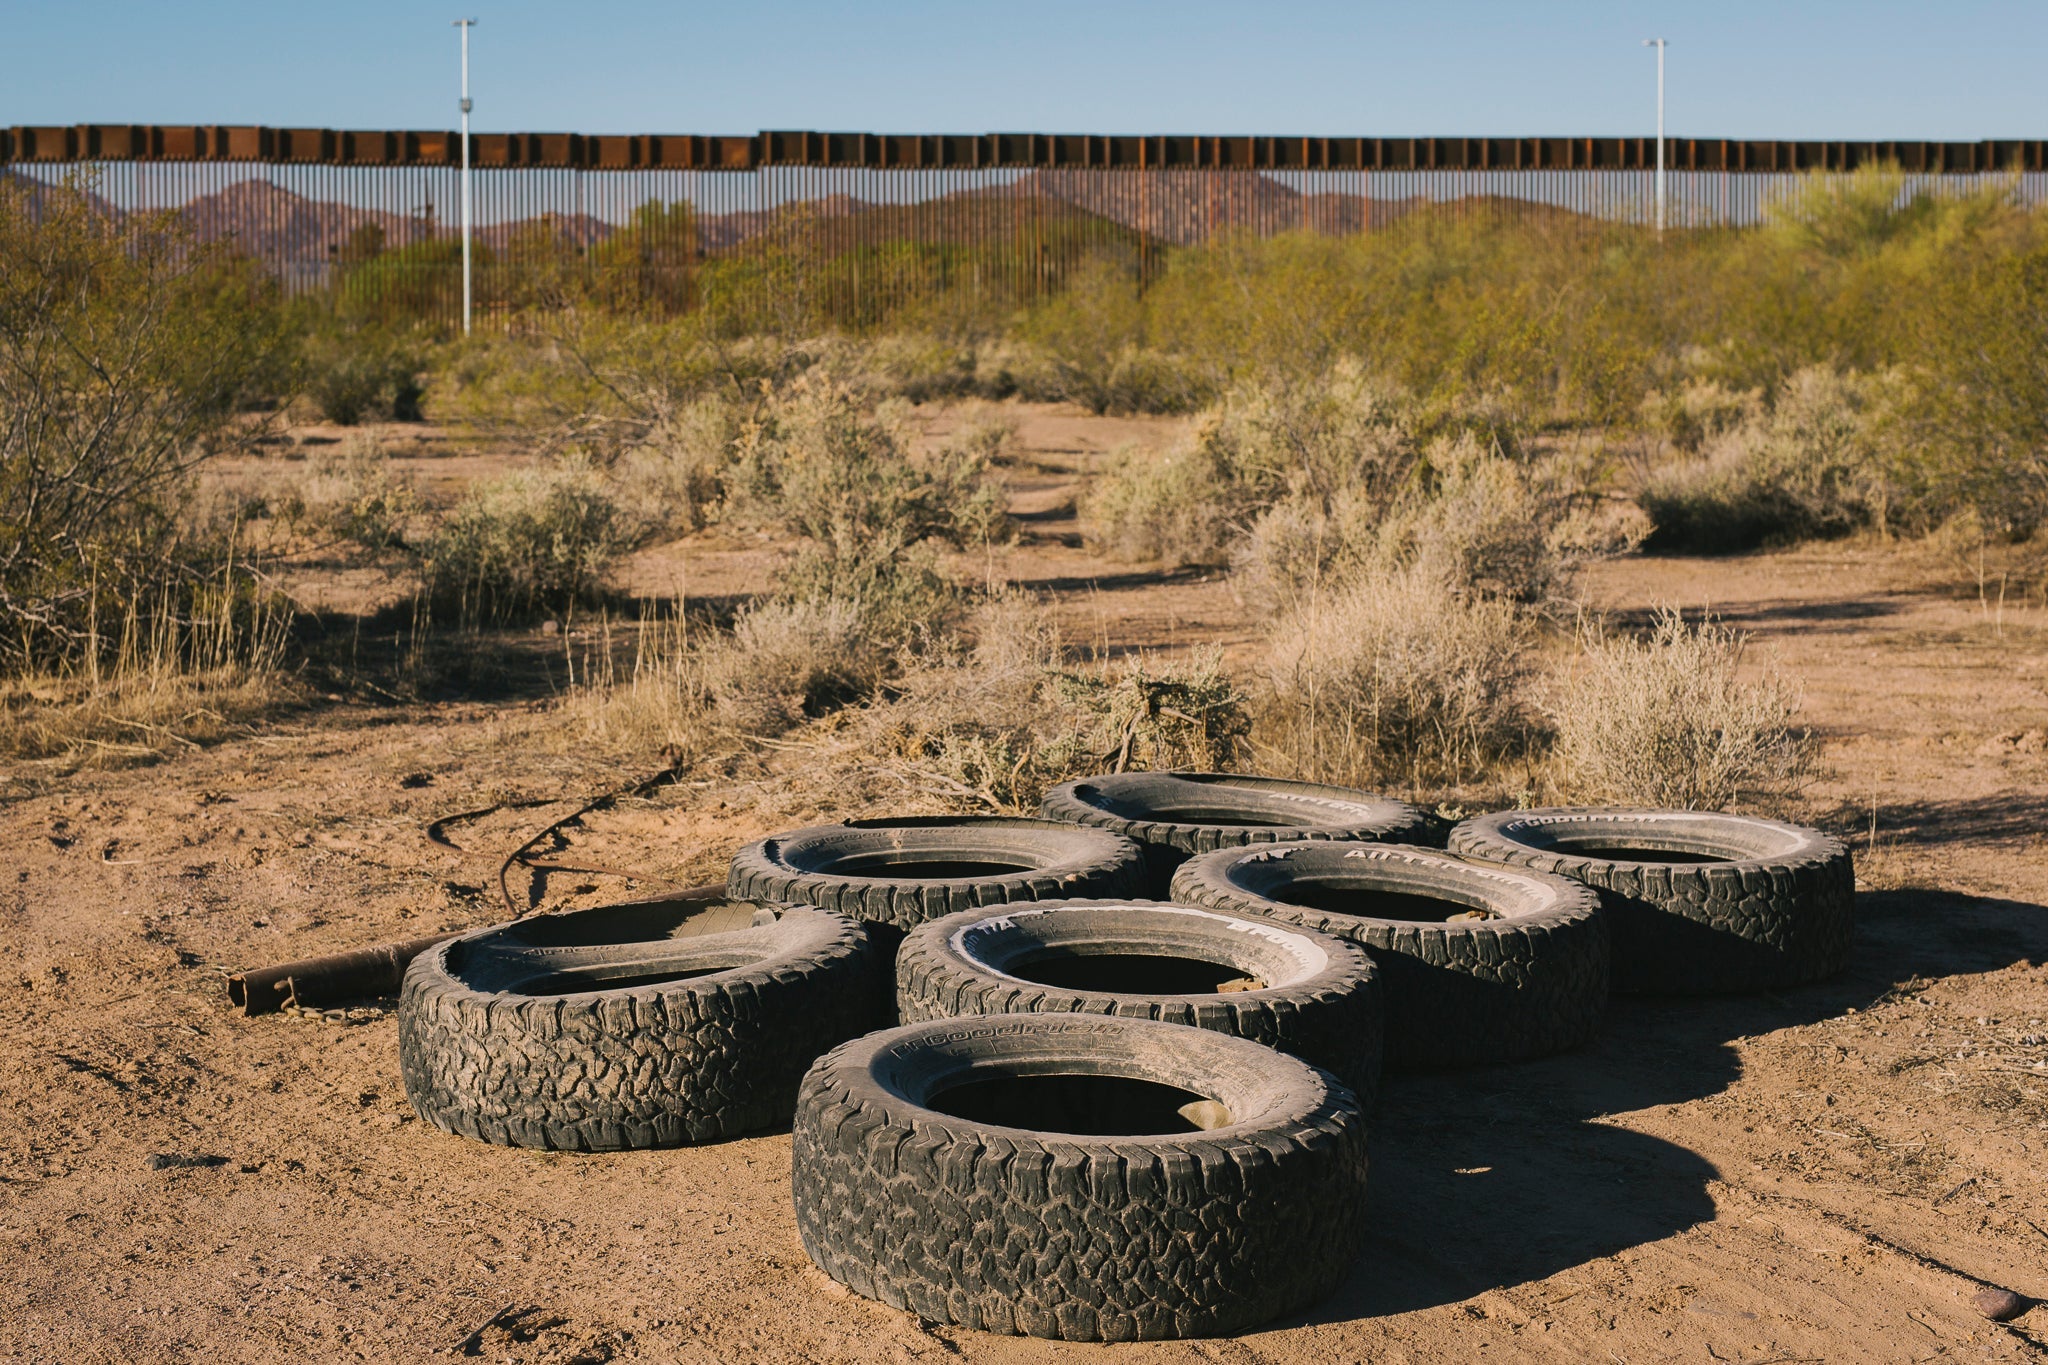 Several dusty tires sit in the desert.